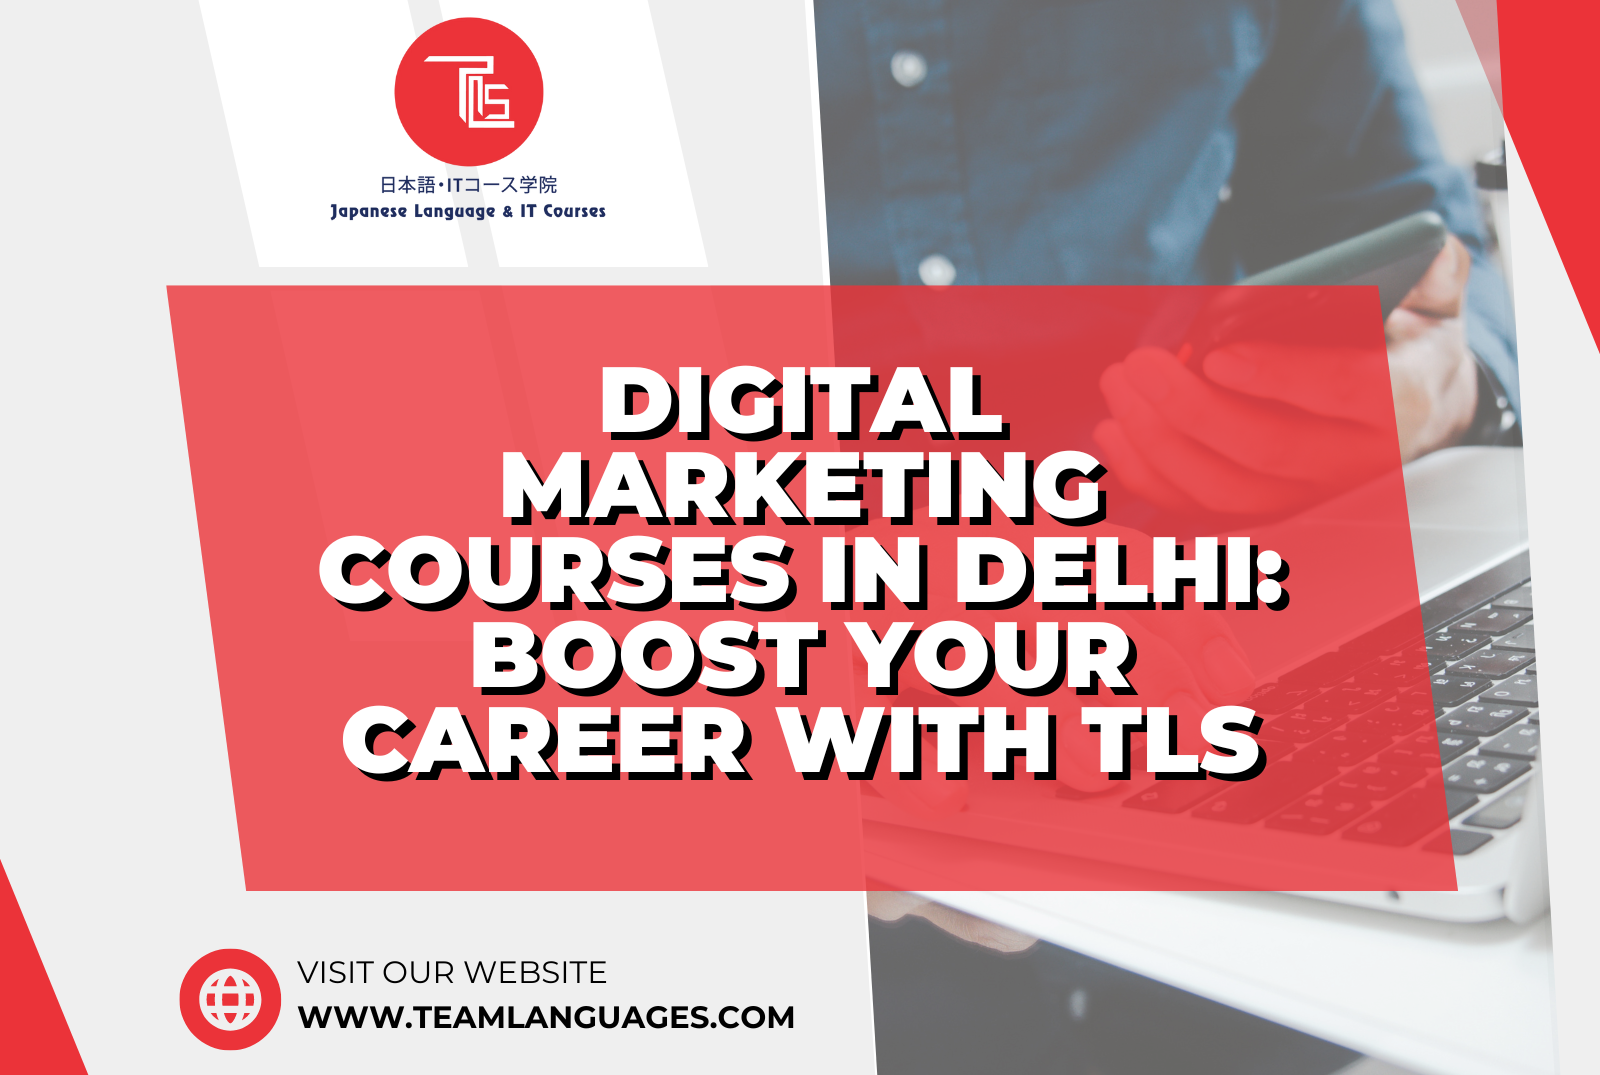 Digital Marketing Courses in Delhi: Boost Your Career With TLS